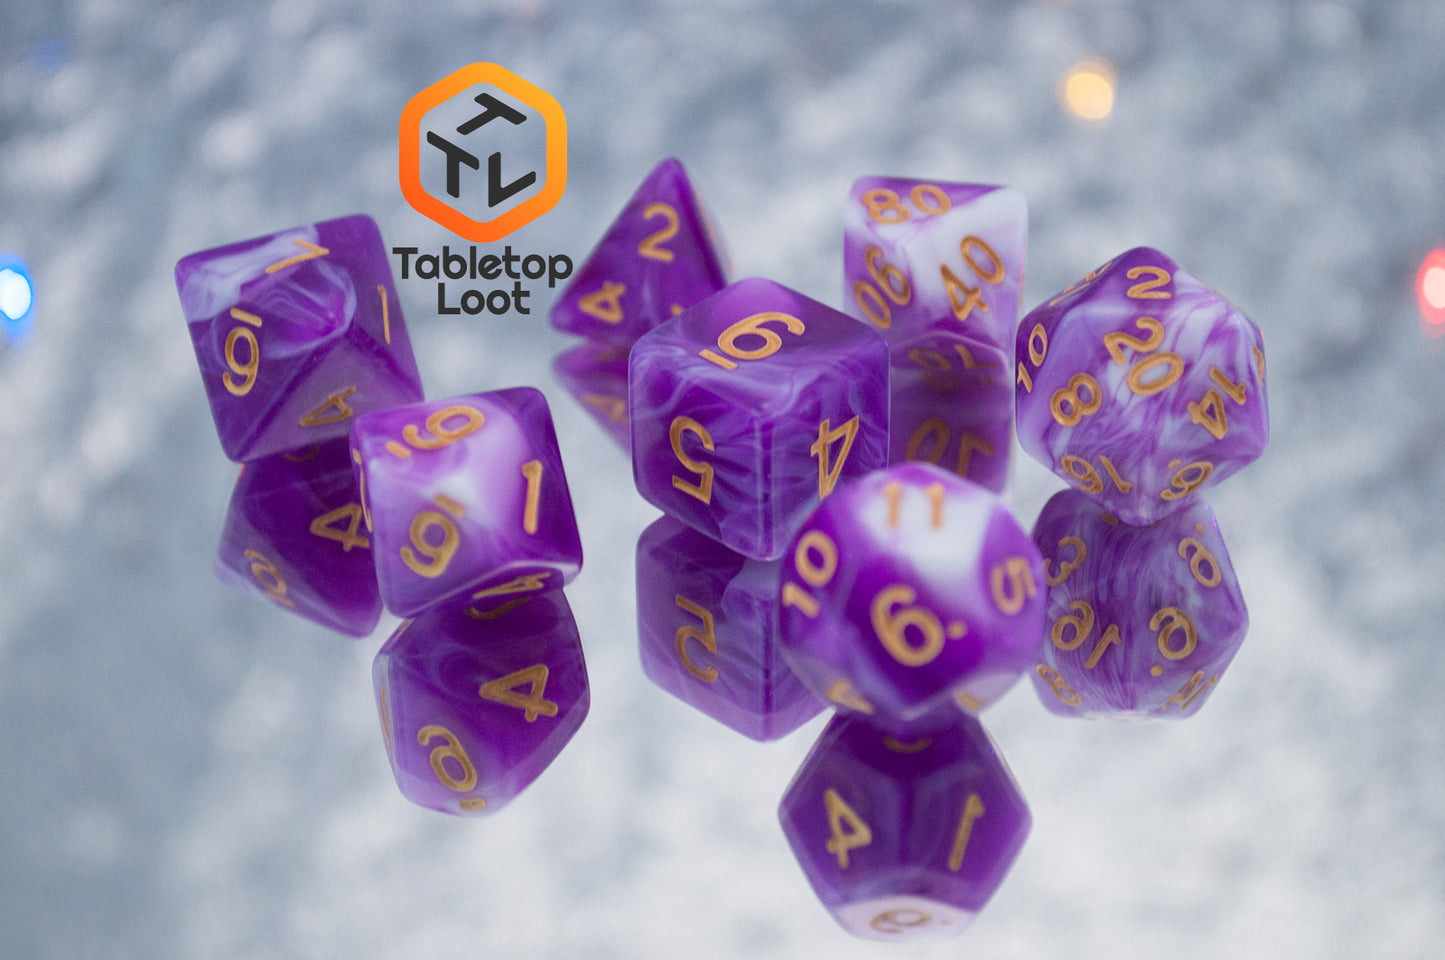 The Berry Blast 7 piece dice set from Tabletop Loot with swirls of purple and white and gold numbering.